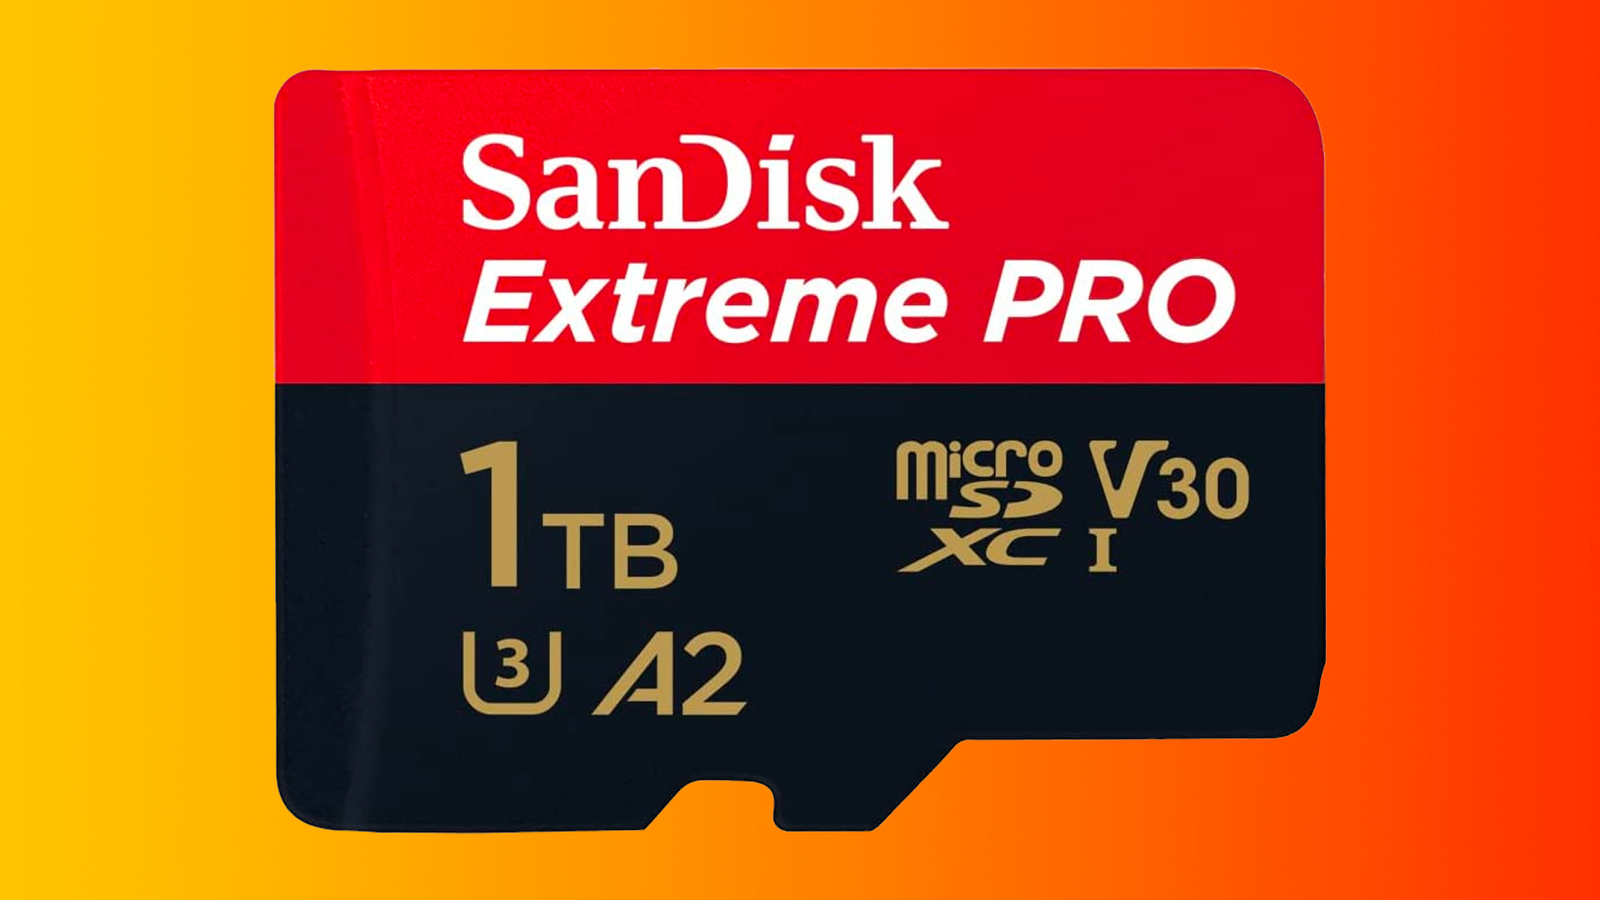 This 1TB SanDisk Extreme Pro MicroSD card is just £129 from